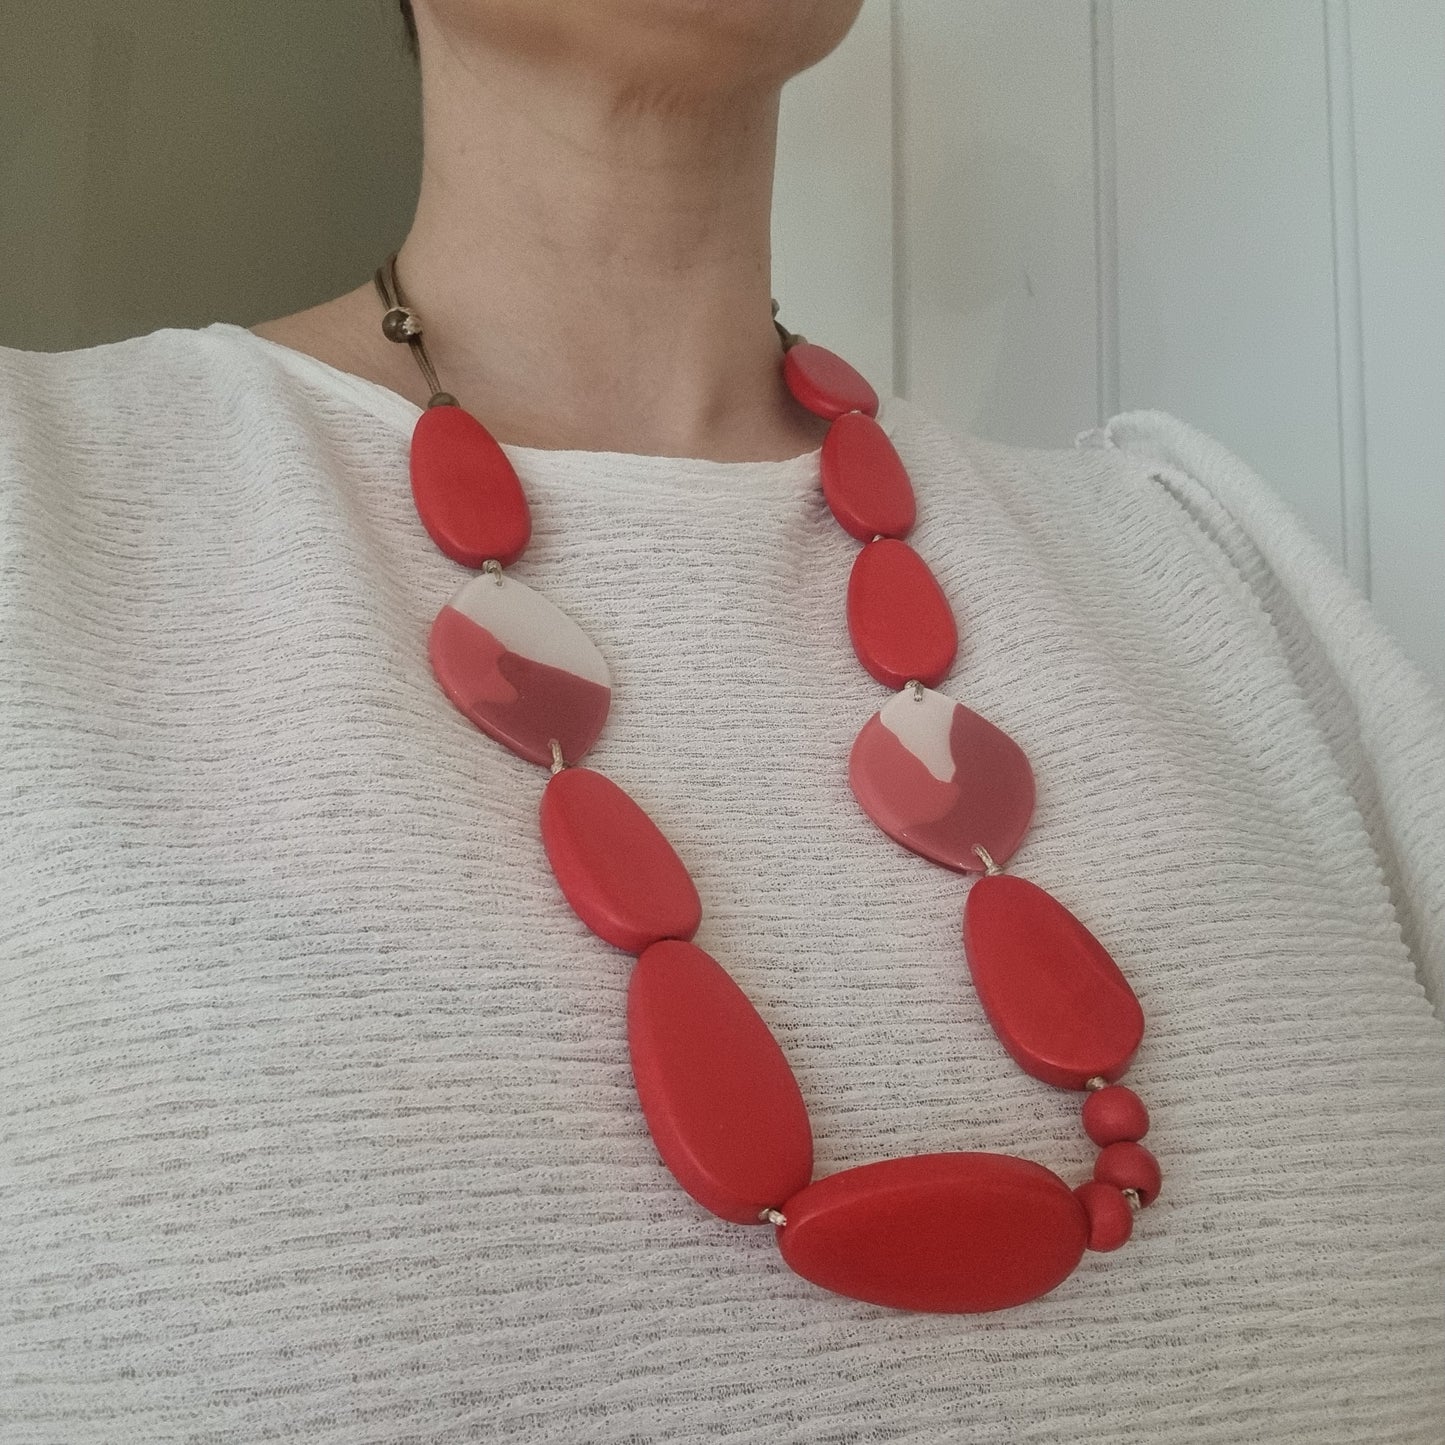 Dante Red bead long necklace